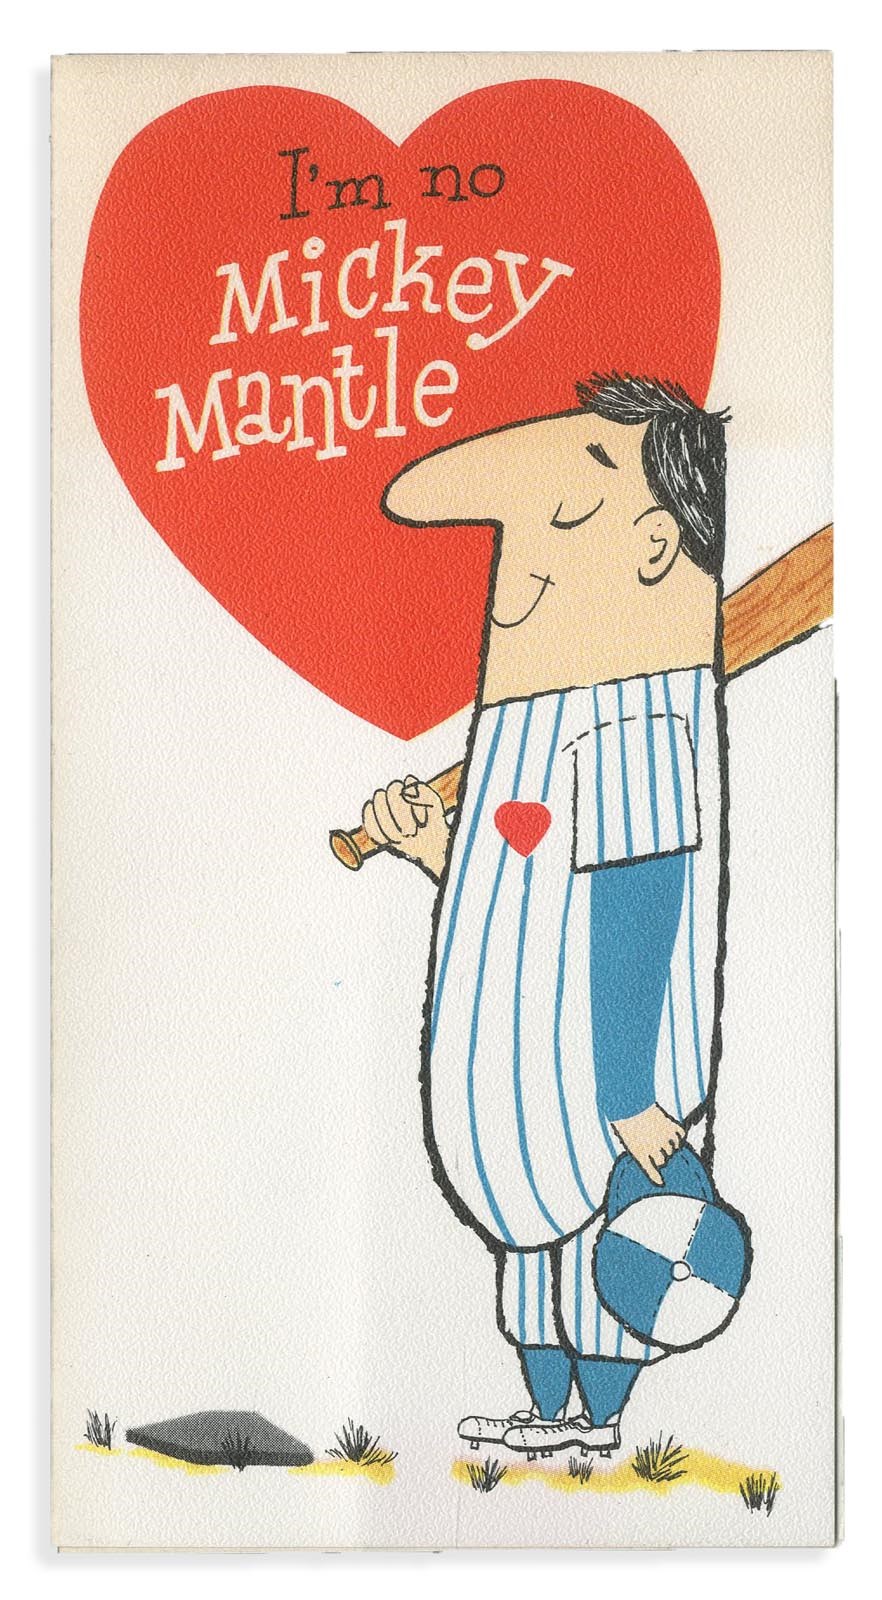 Mantle and Maris - Rare 1960s Mickey Mantle Valentines Day Card